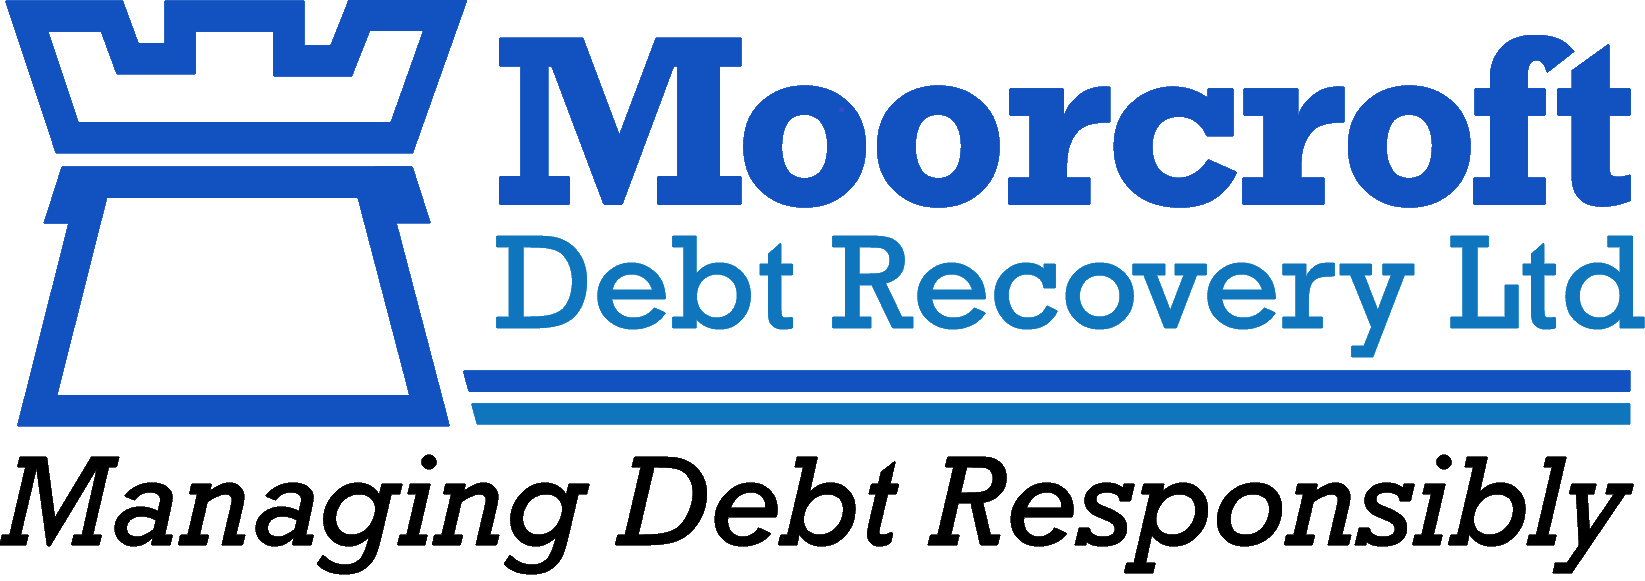 Moorcroft Debt Recovery Ltd Home Page